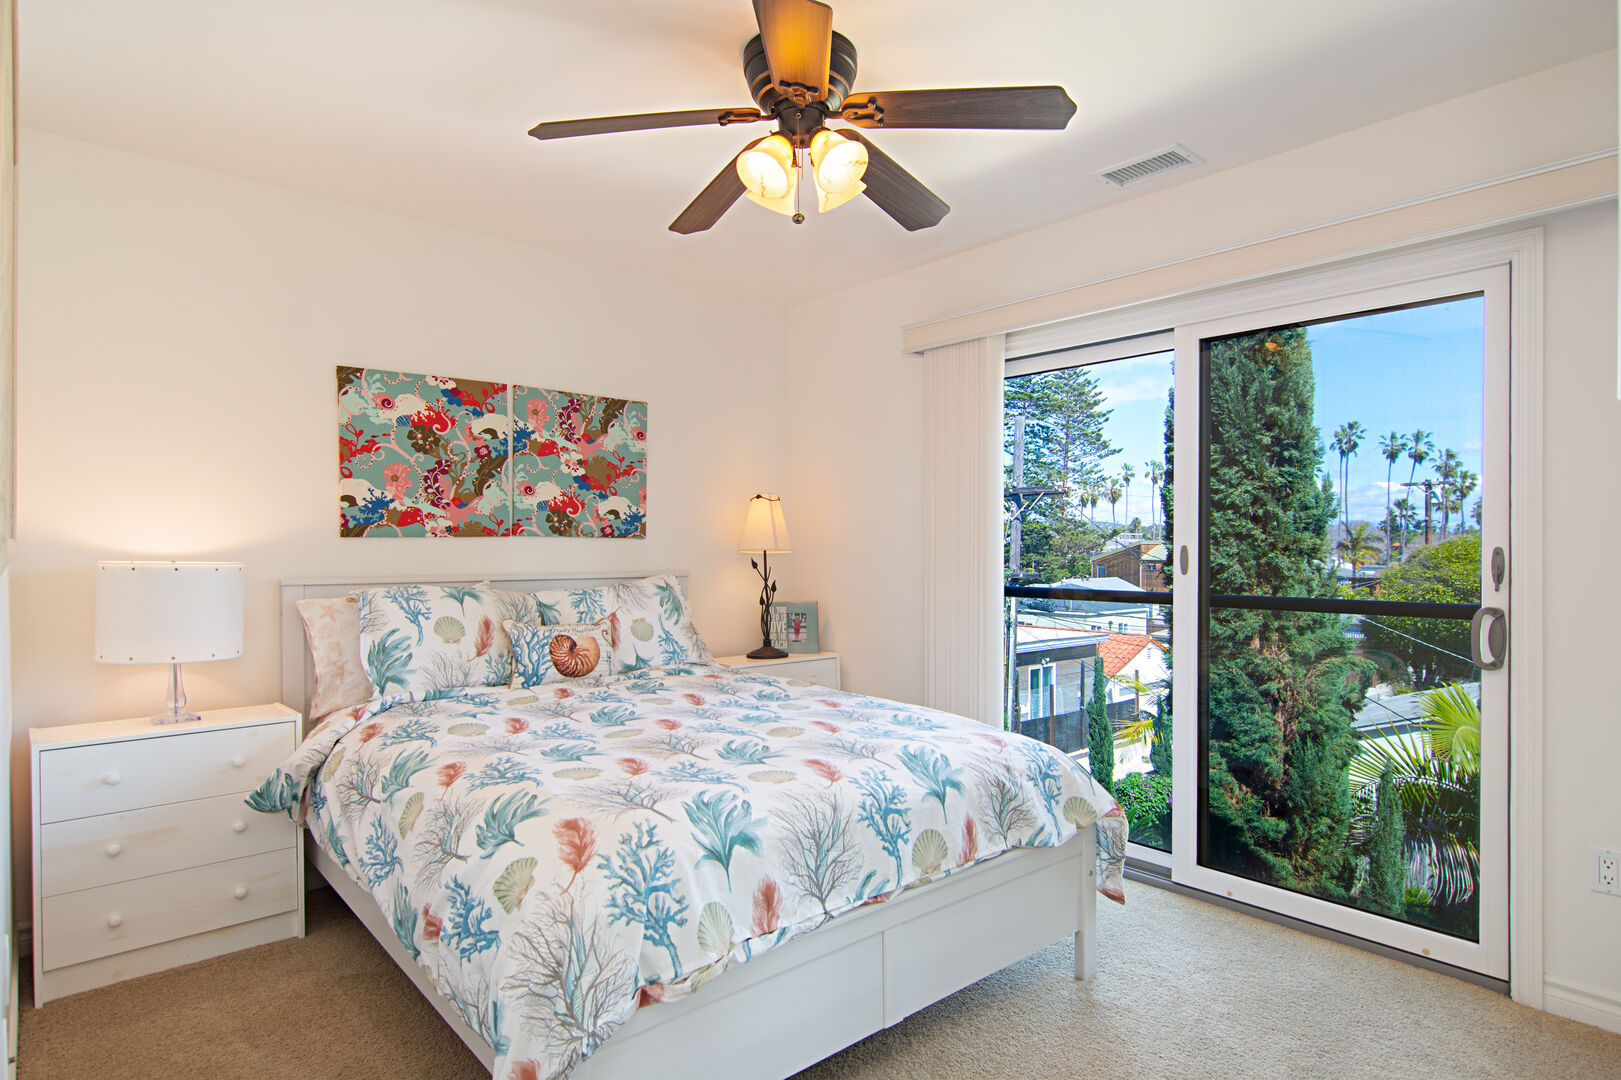 Upstairs guest bedroom with queen bed, ceiling fan and private balcony